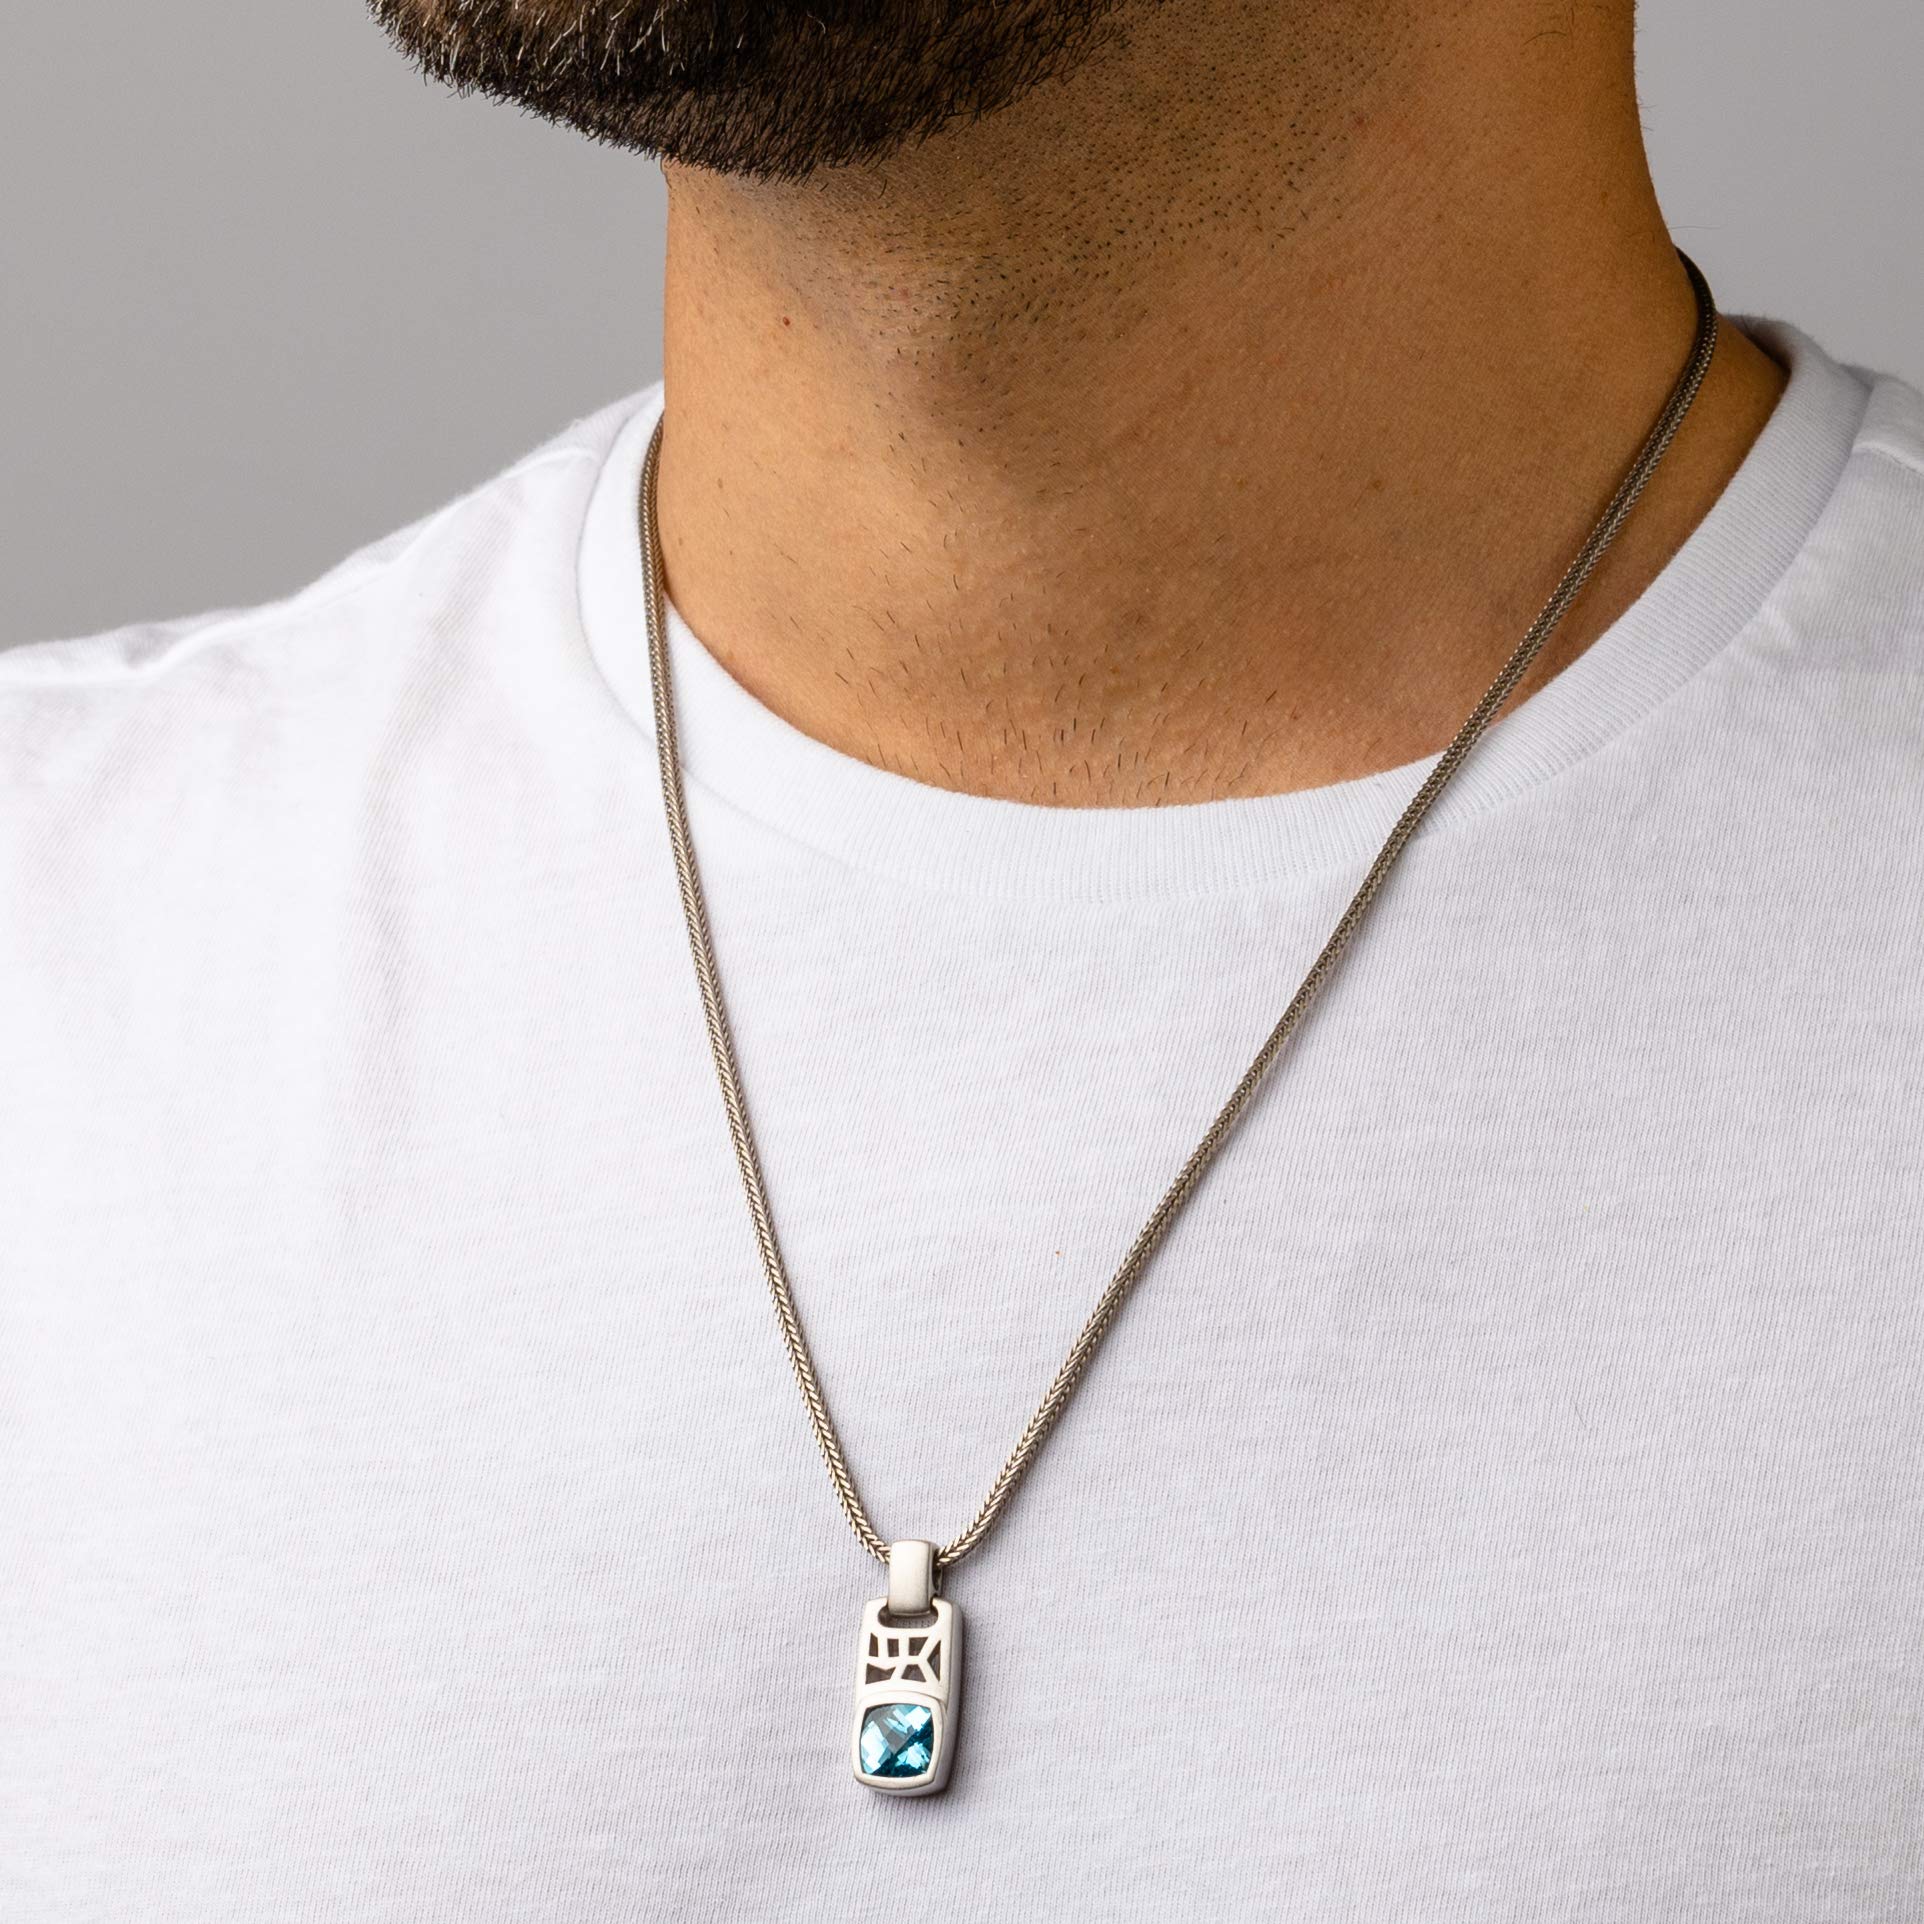 Peora London Blue Topaz Tag Pendant Necklace for Men in Sterling Silver,3.50 Carats Cushion Cut, Brushed Finished, with 22-Inch Italian Chain